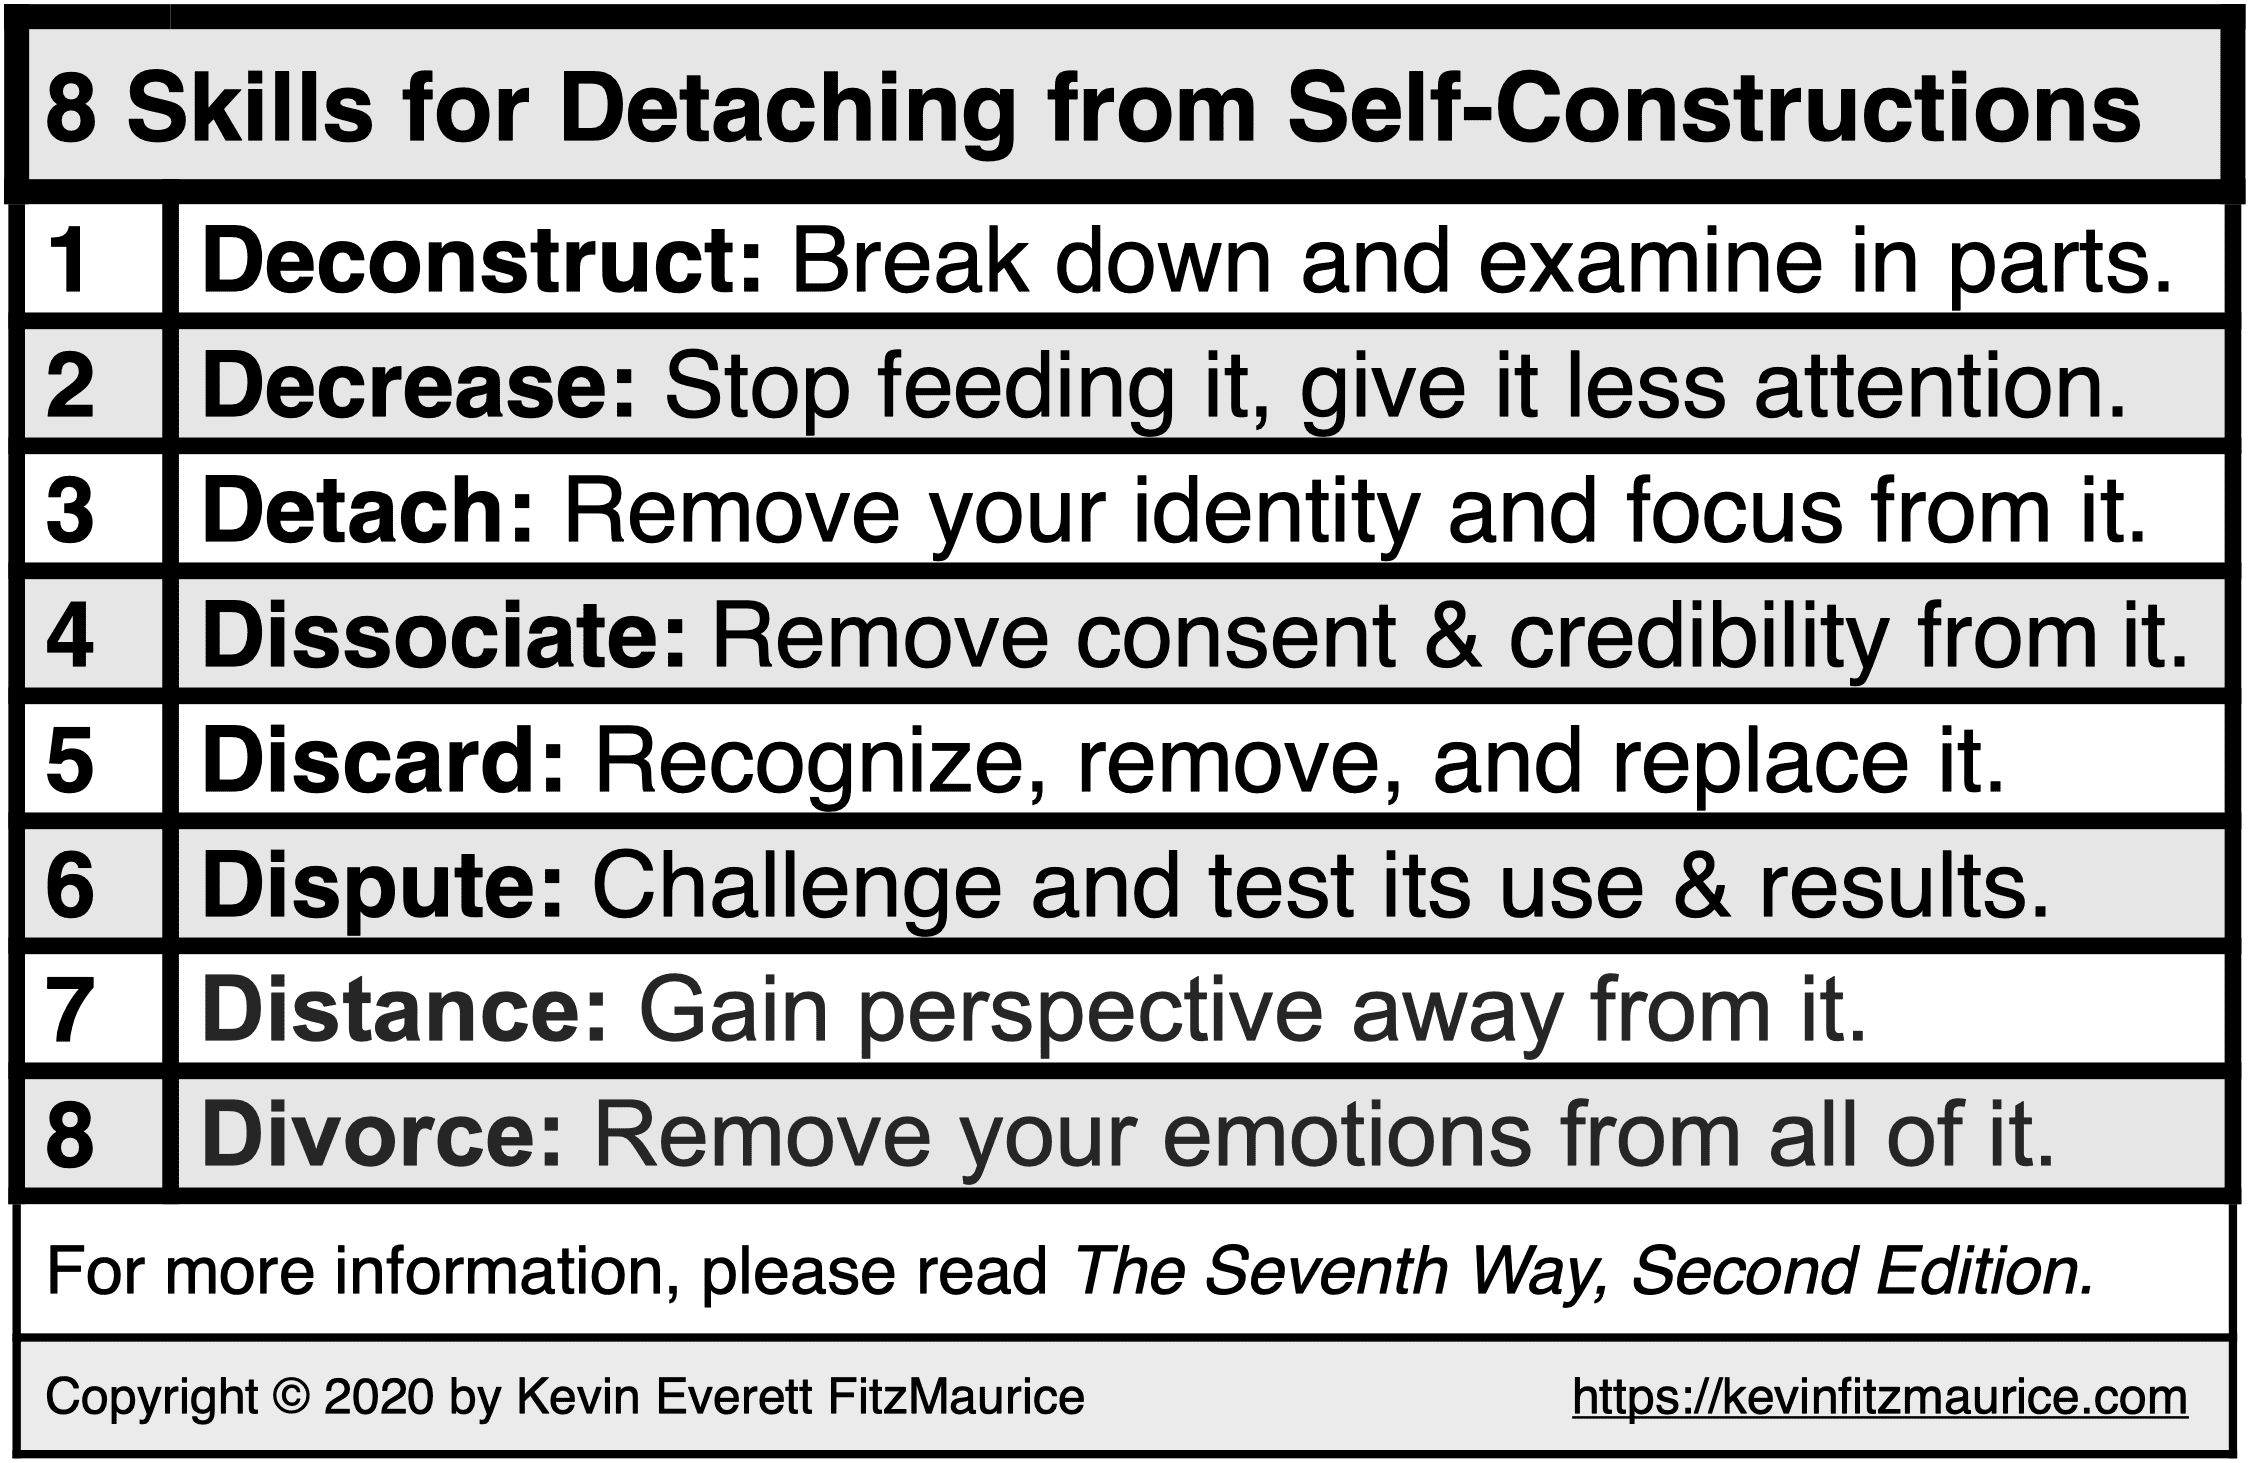 8 Skills for Detaching from Self-Constructions